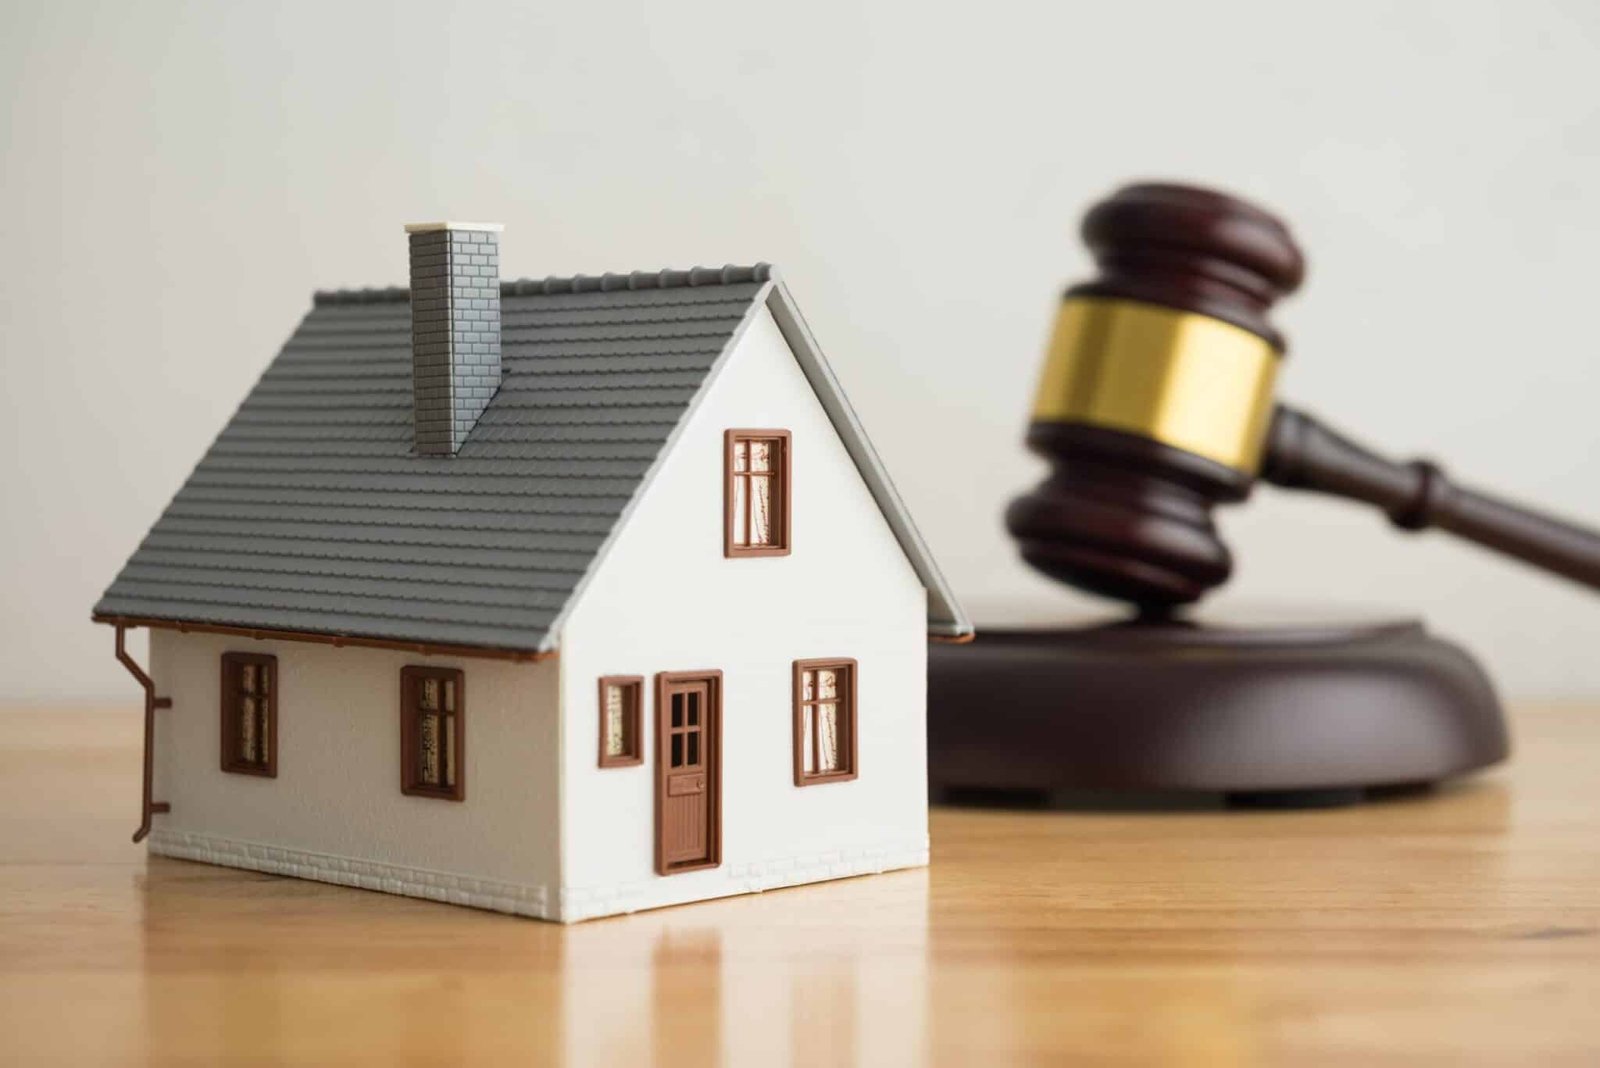 The image shows a beautiful two-story house with a gavel superimposed on it, symbolising divorce.